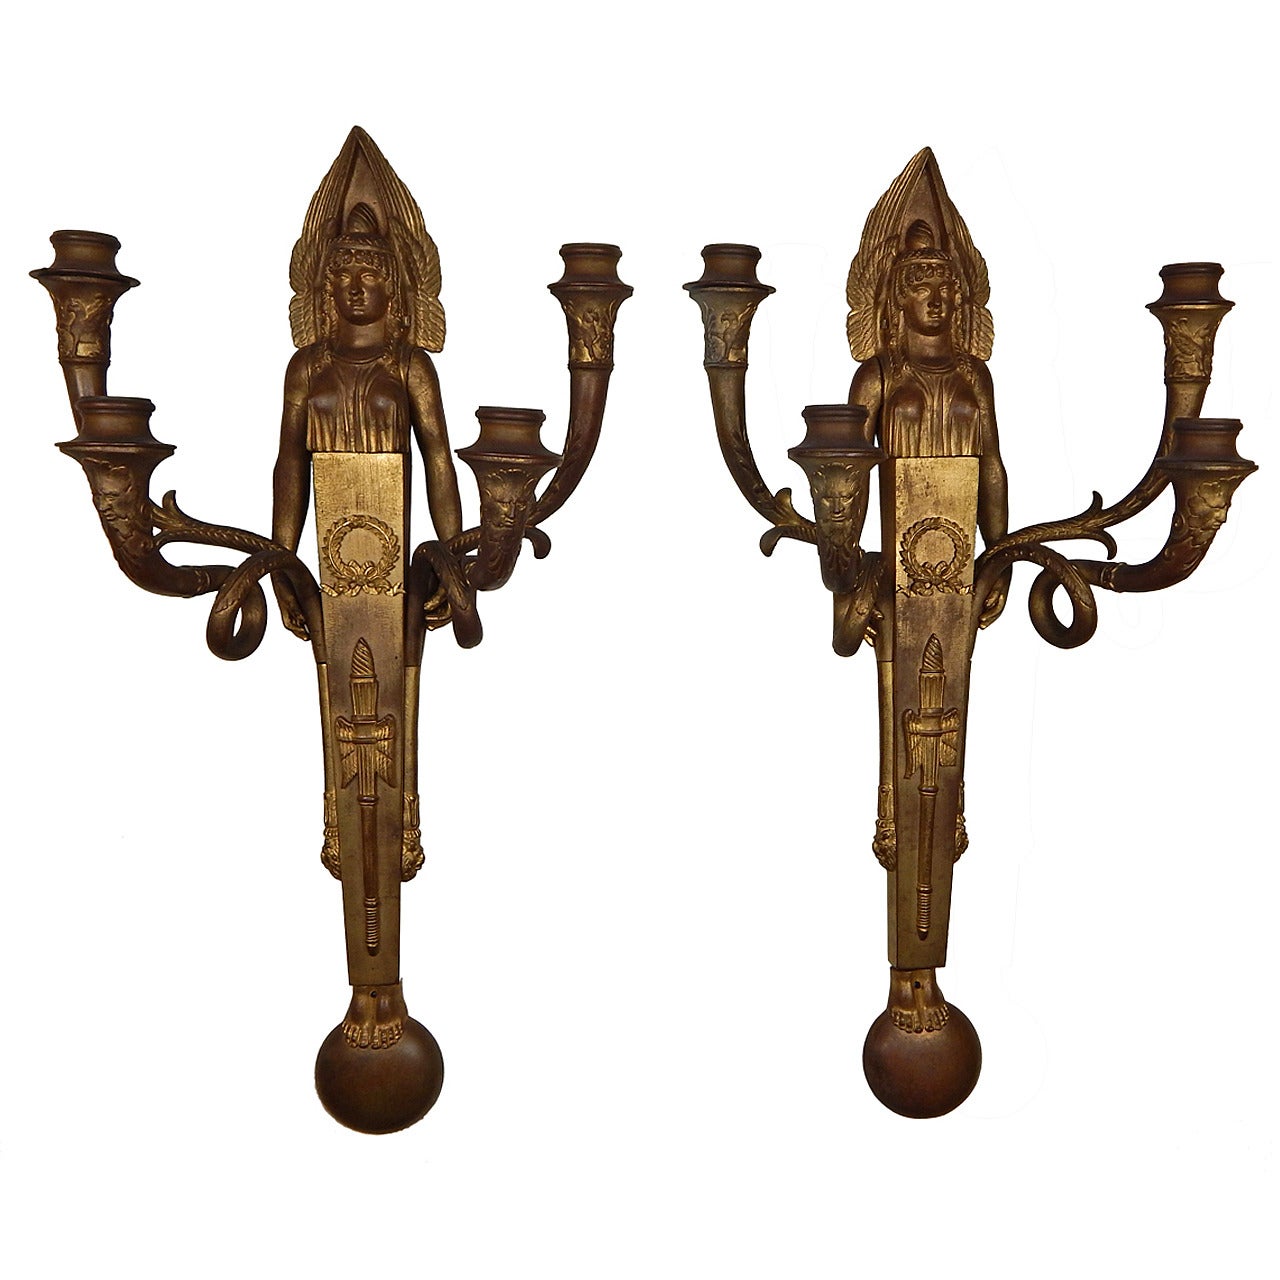  Pair of French Empire Period Bronze Sconces For Sale